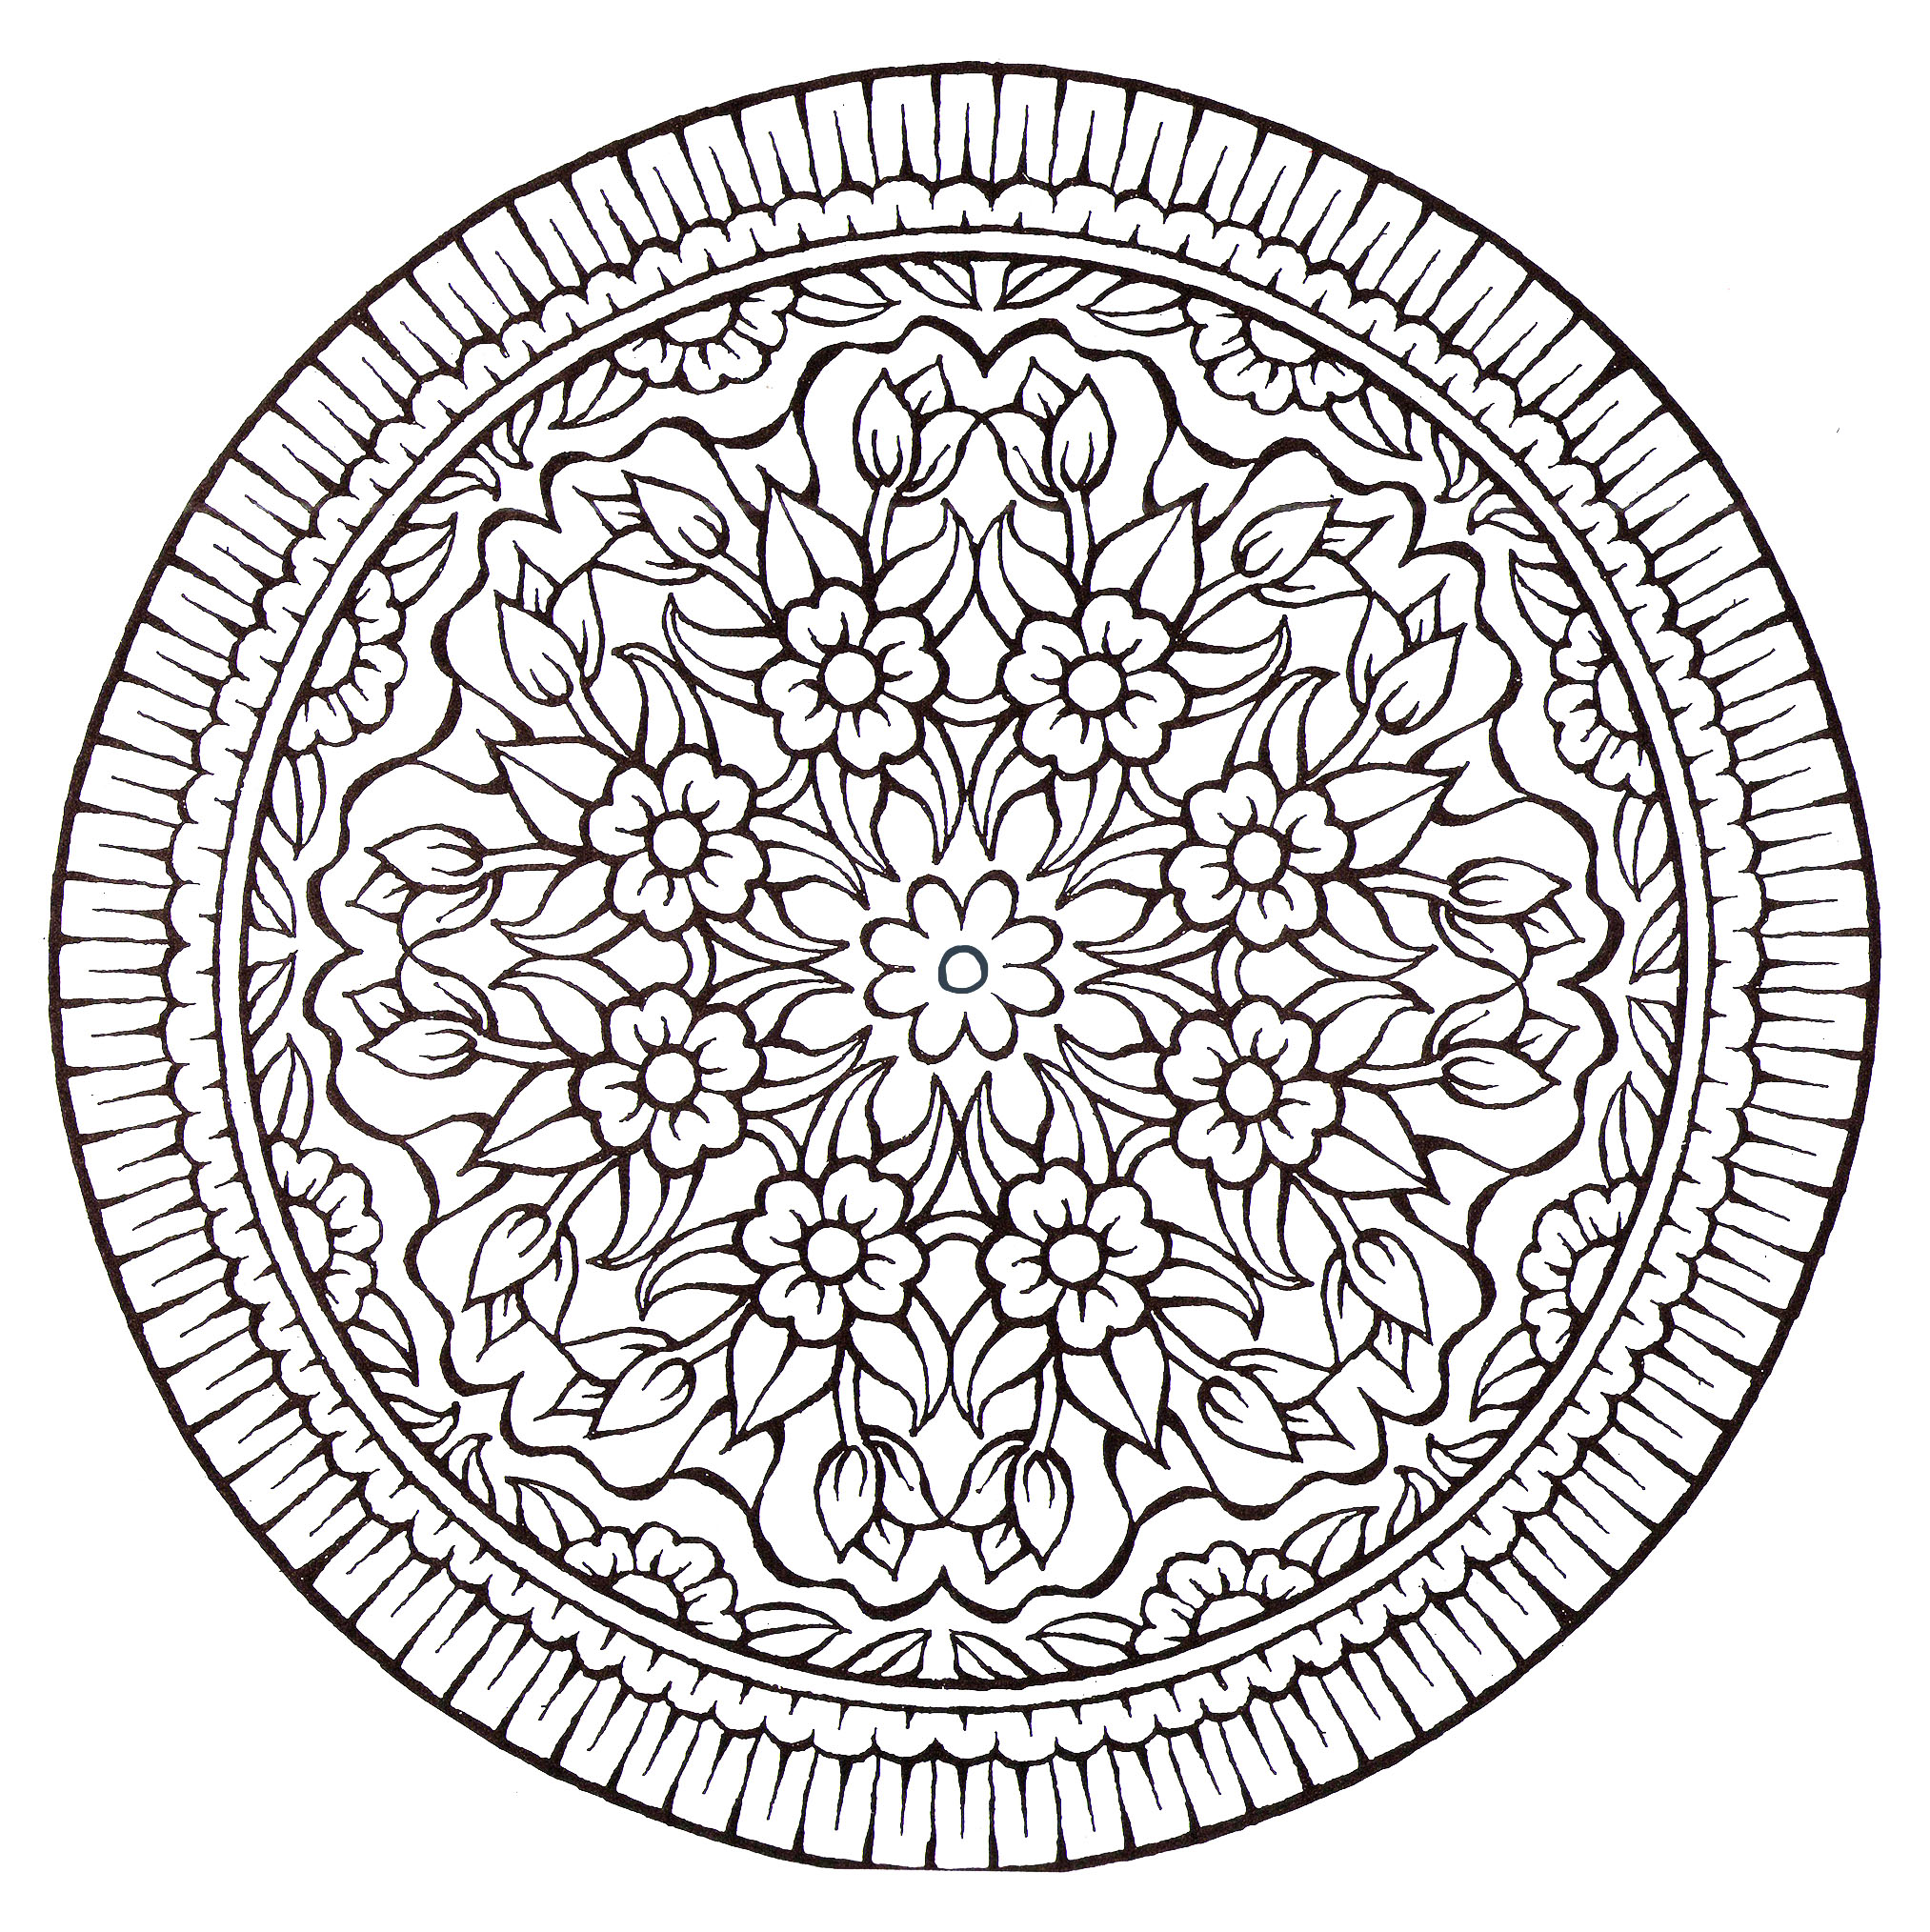 A Mandala very 'Vintage style', with a lot of flowersFrom the gallery : Mandalas